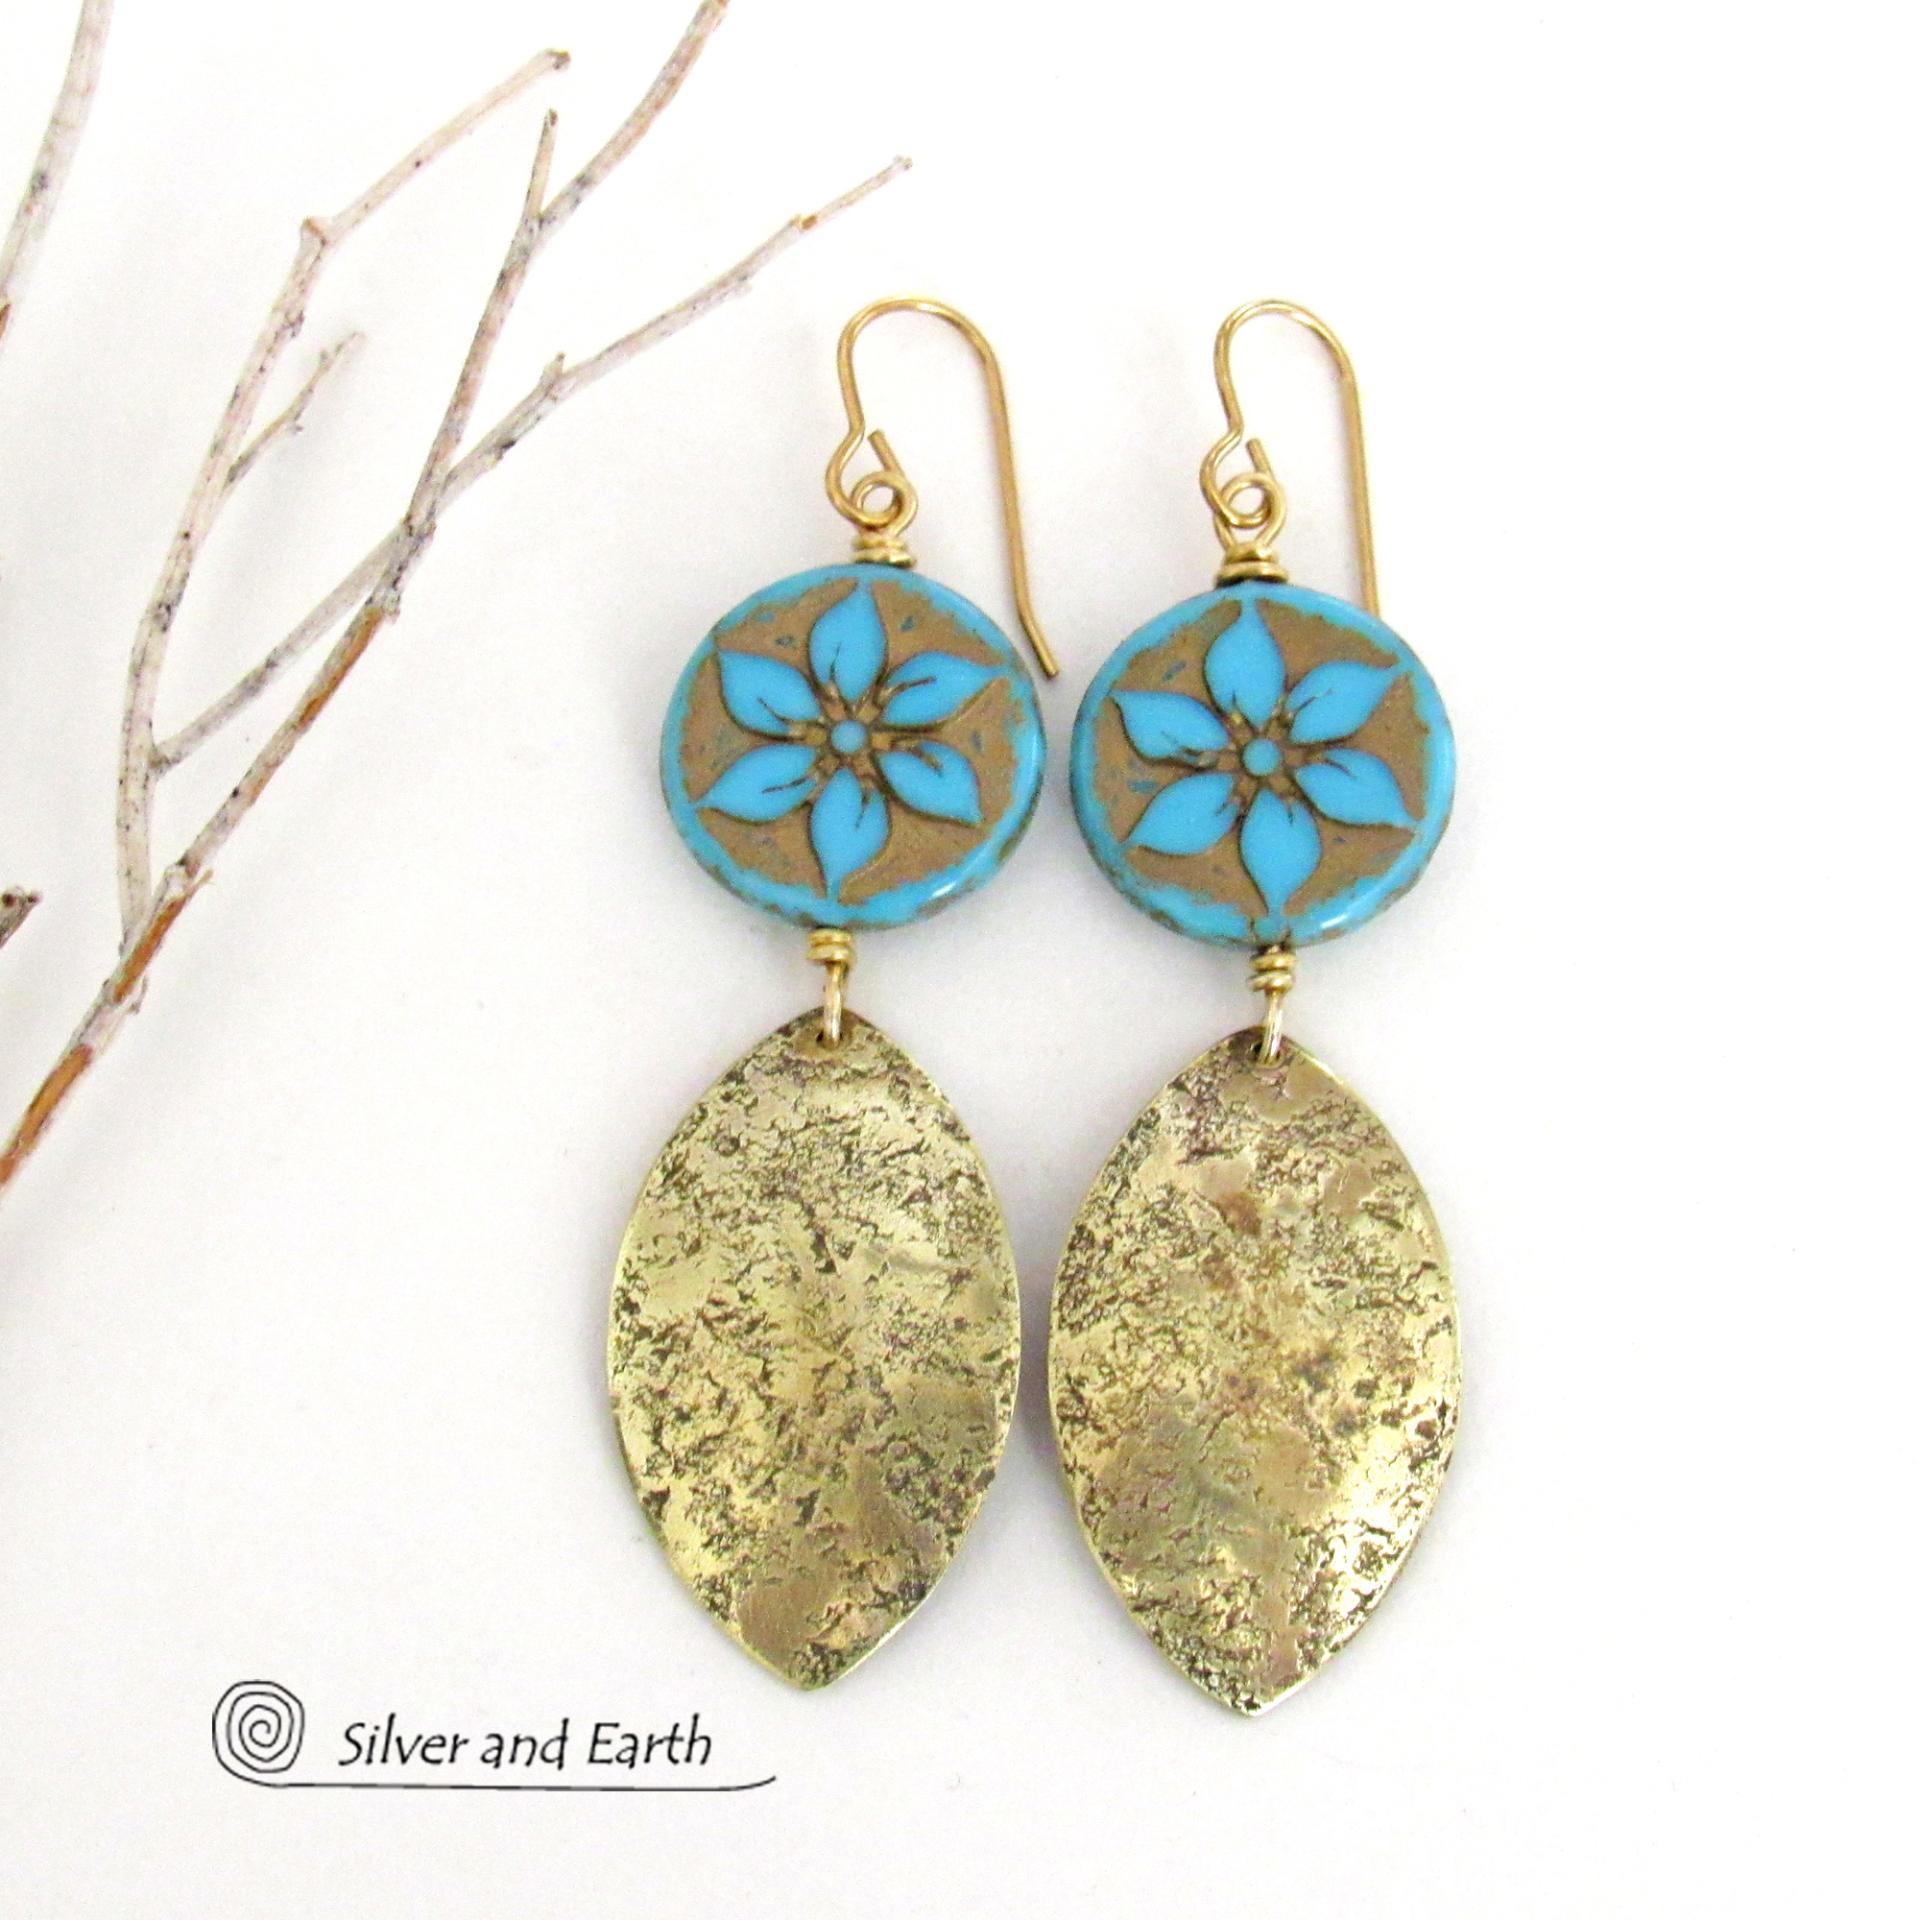 Blue Flower Glass Earrings with Gold Brass Leaf Shaped Dangles - Unique Nature Jewelry Gifts for Women